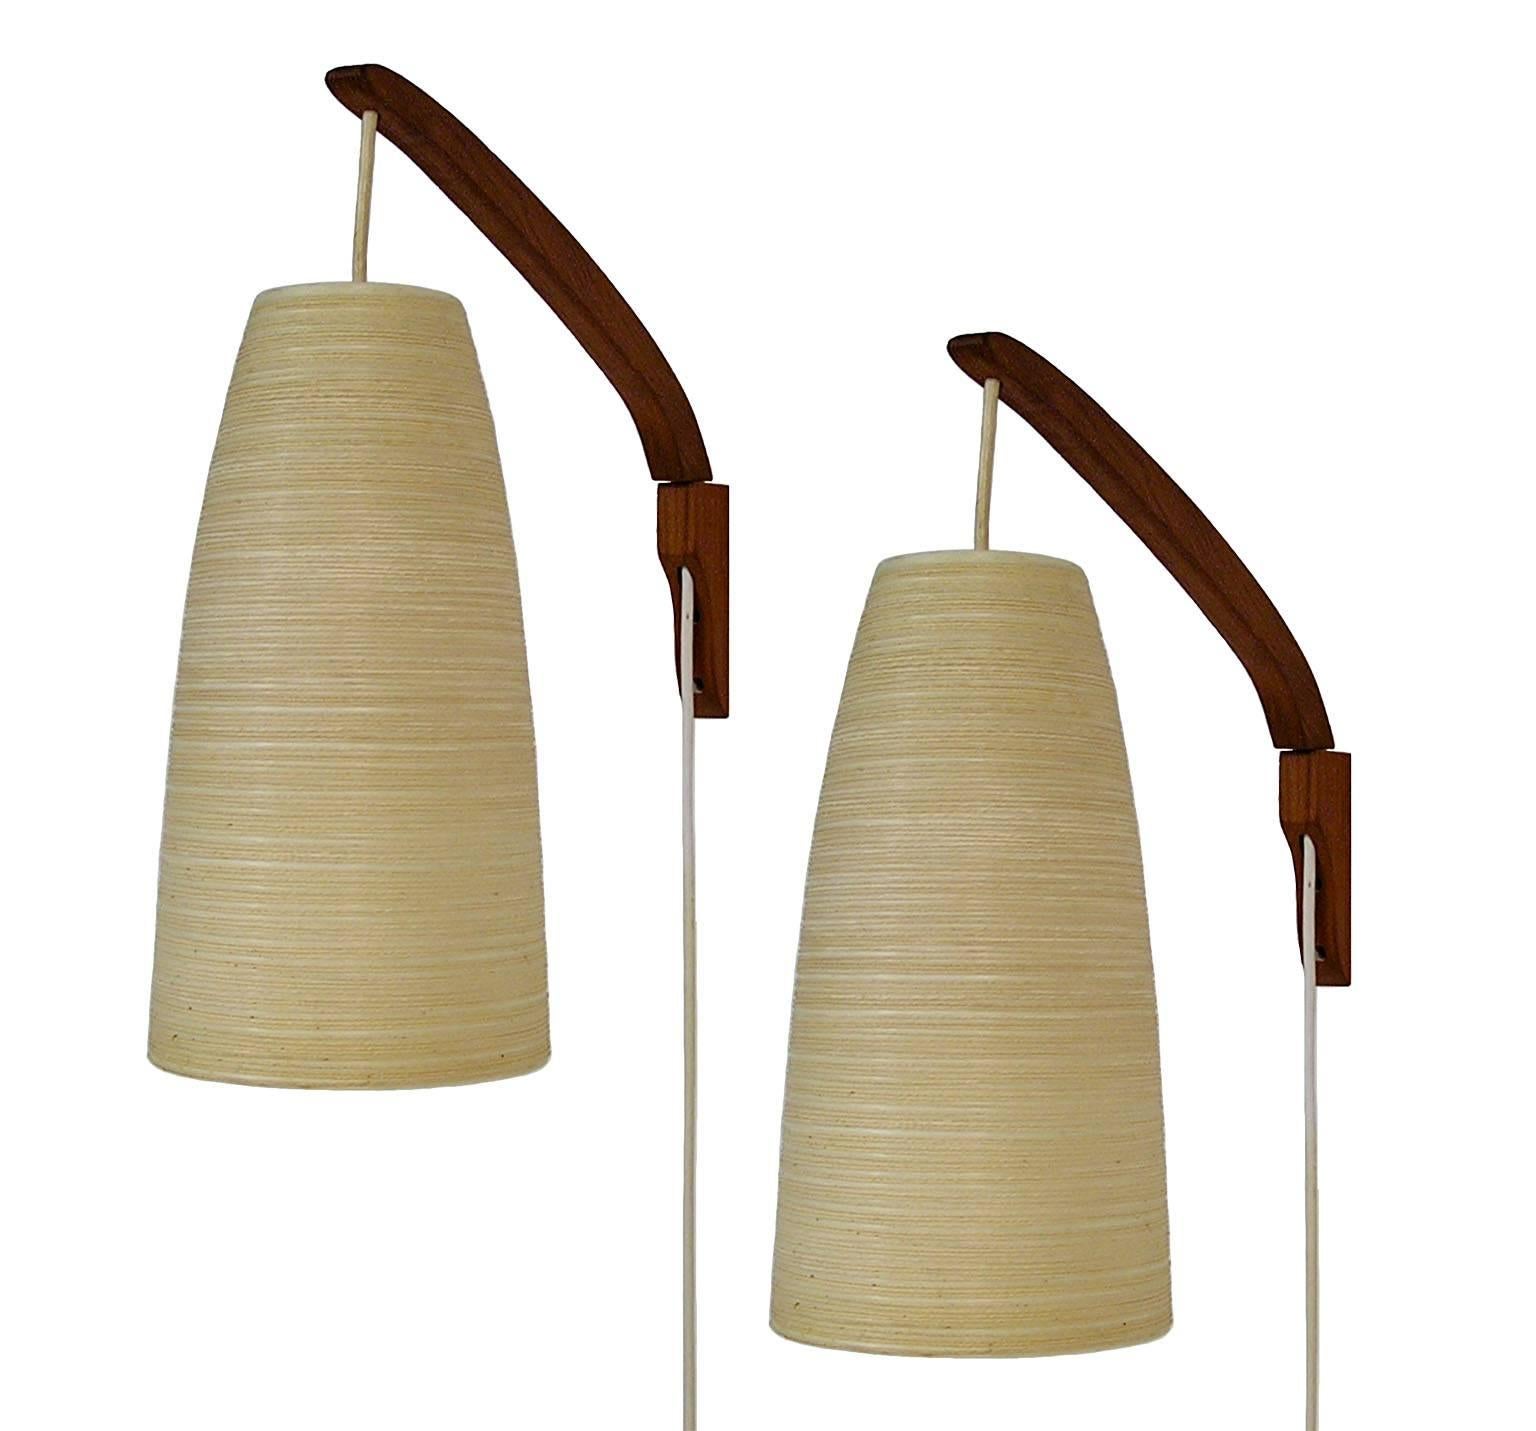 A beautiful pair of teak wall sconces by Gunnar and Lotte Bostlund. Stylish Scandinavian Modern inspired design featuring a unique beehive shaped shade made of fiberglass and jute with an inline thumb switch to power the lamps on and off. The solid